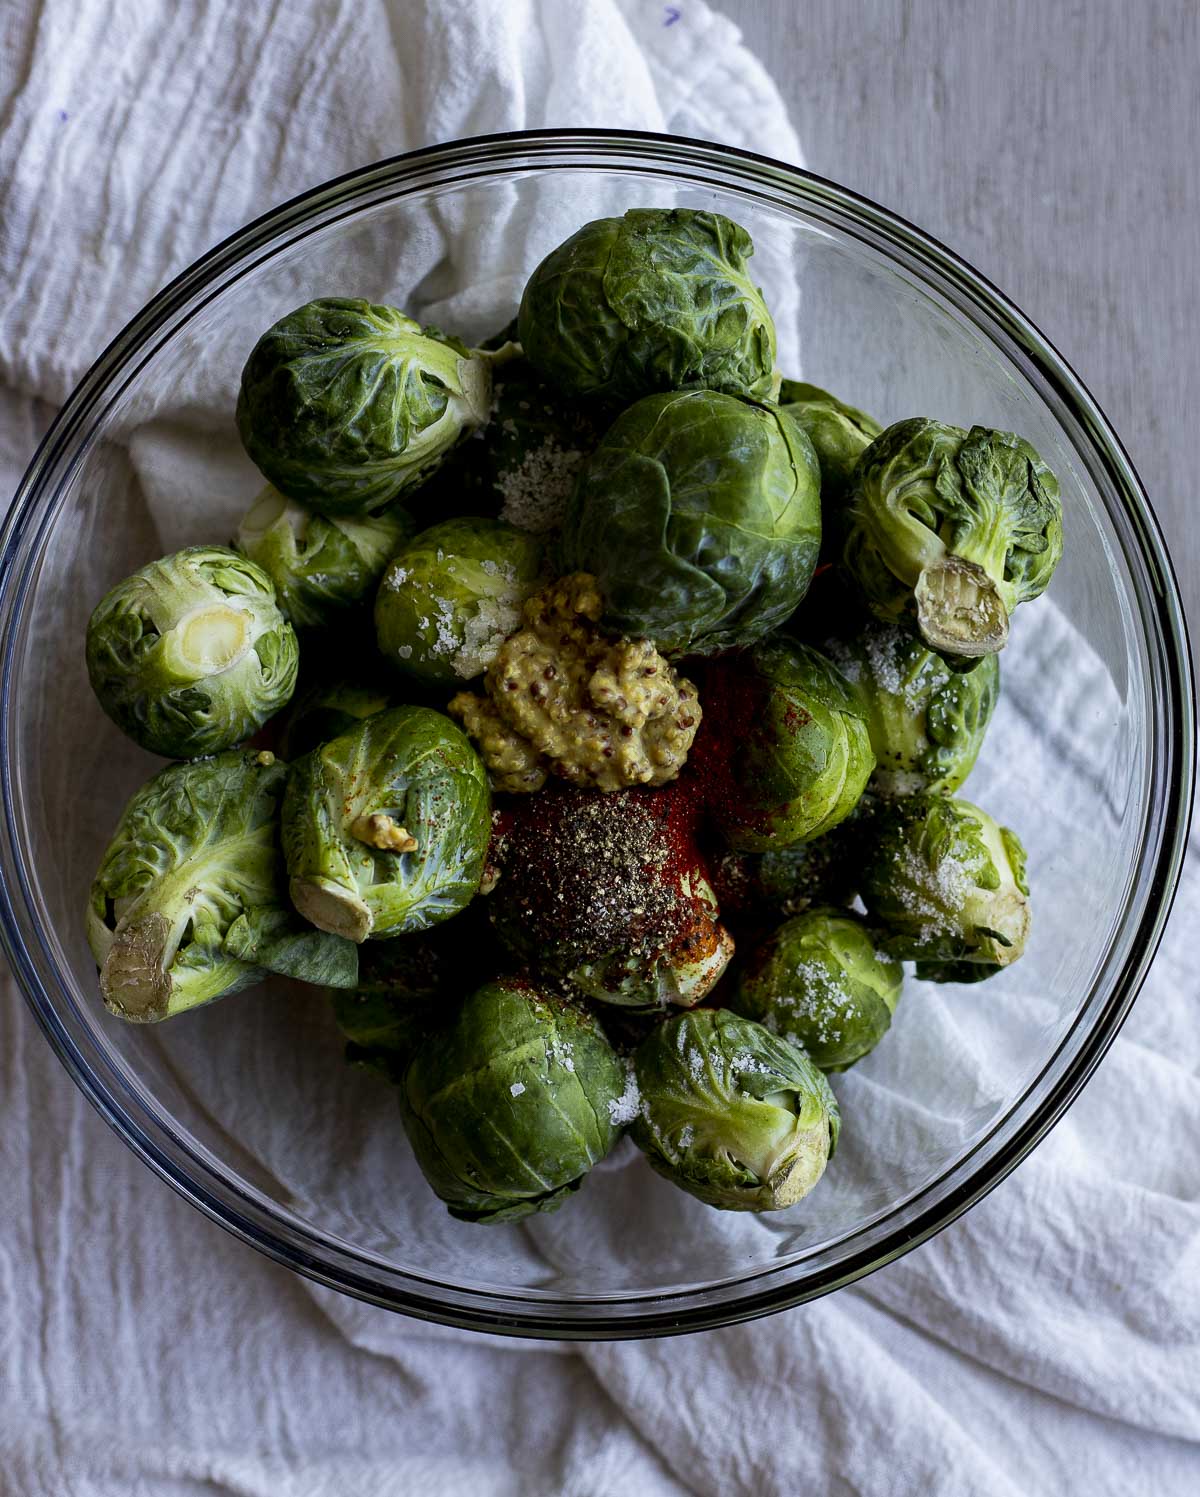 Brussels sprouts mixed with the other ingredients in a glass bowl.